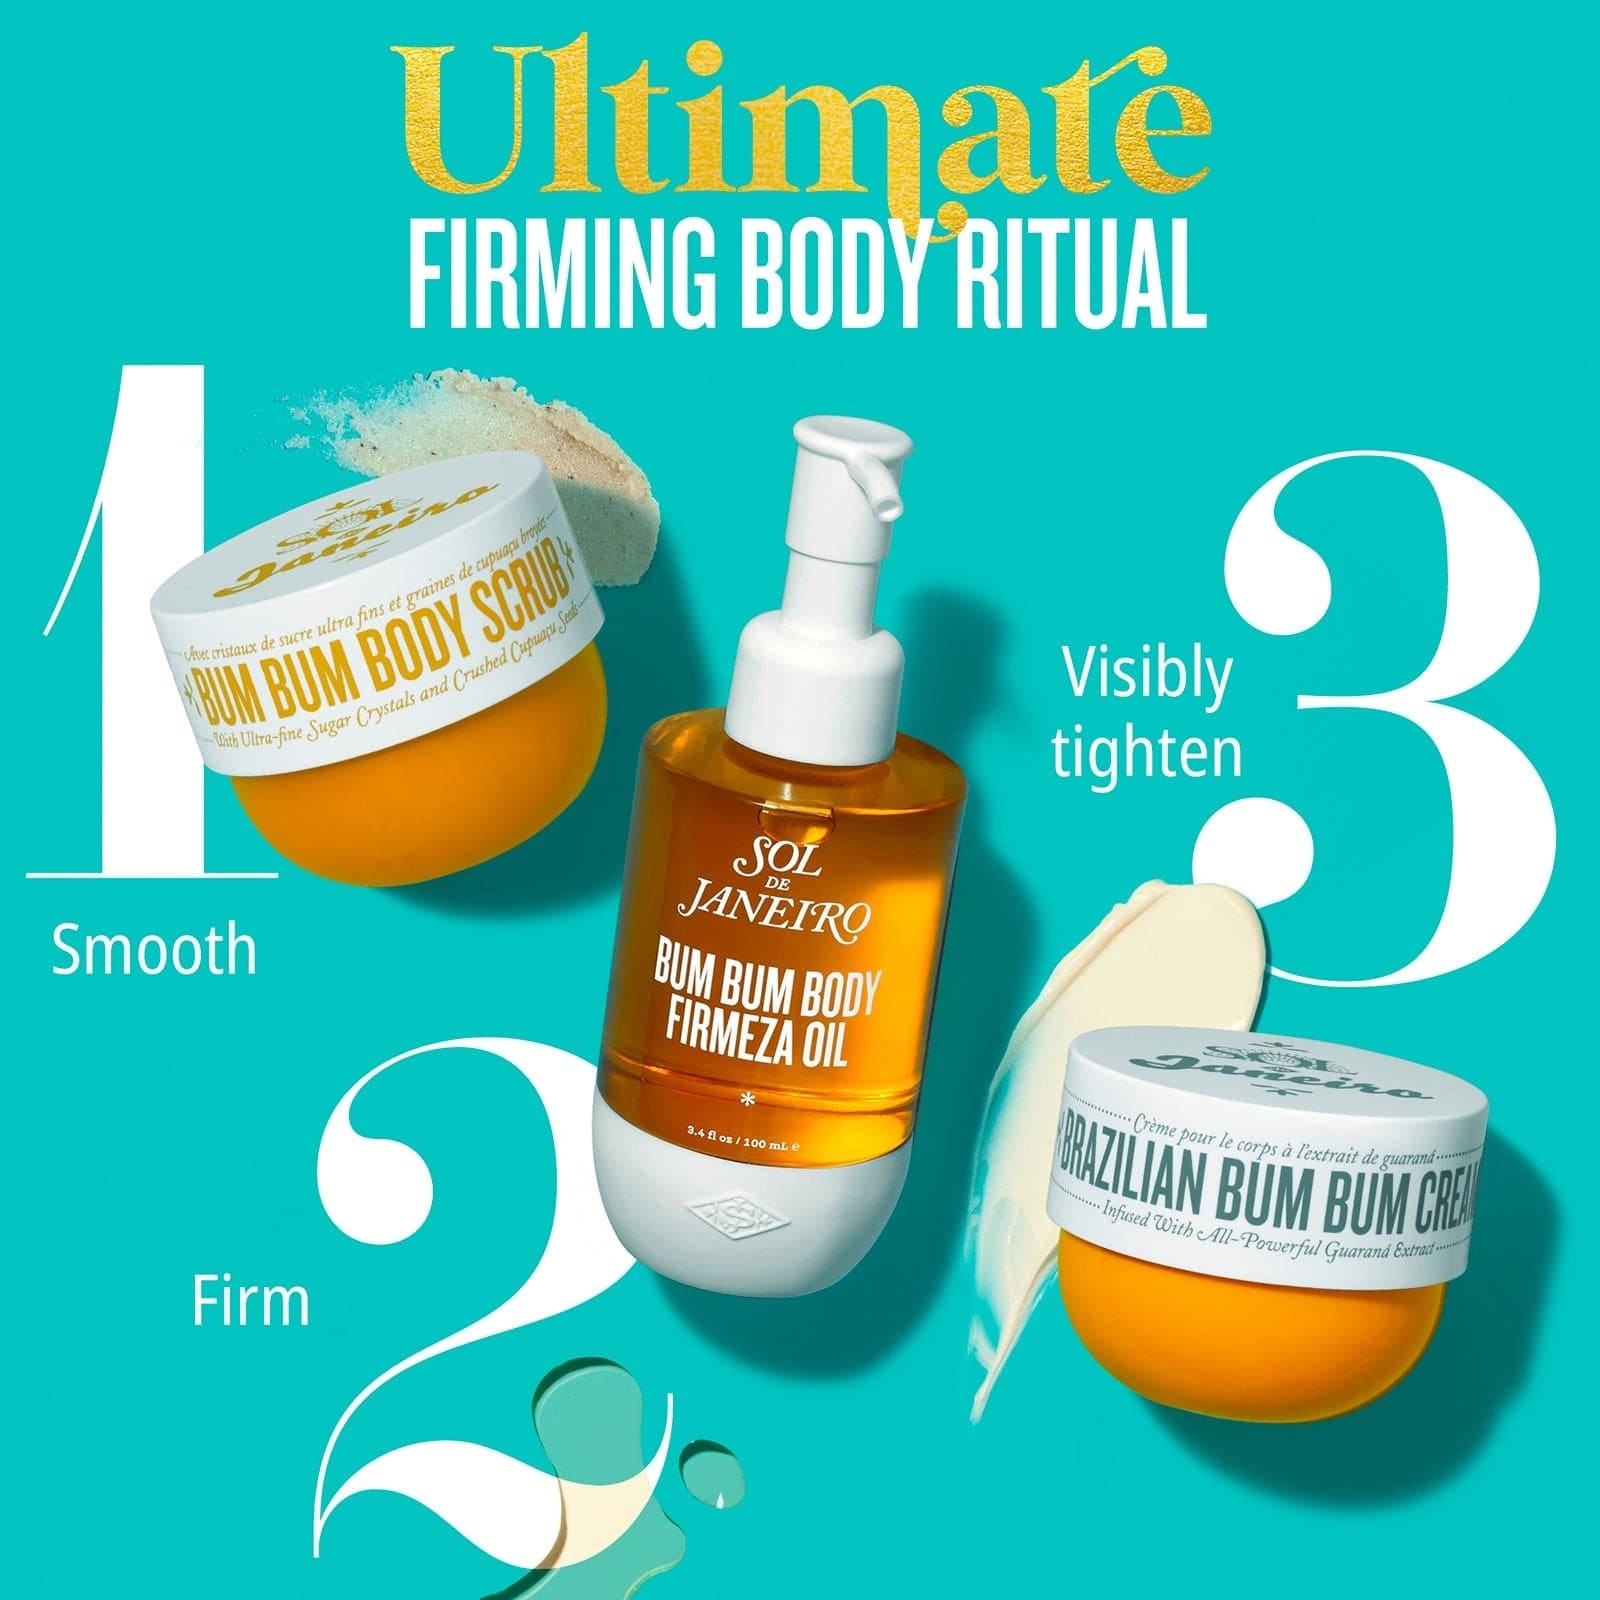 Ultimate firming body ritual 1. smooth 2. firm 3. visibly tighten